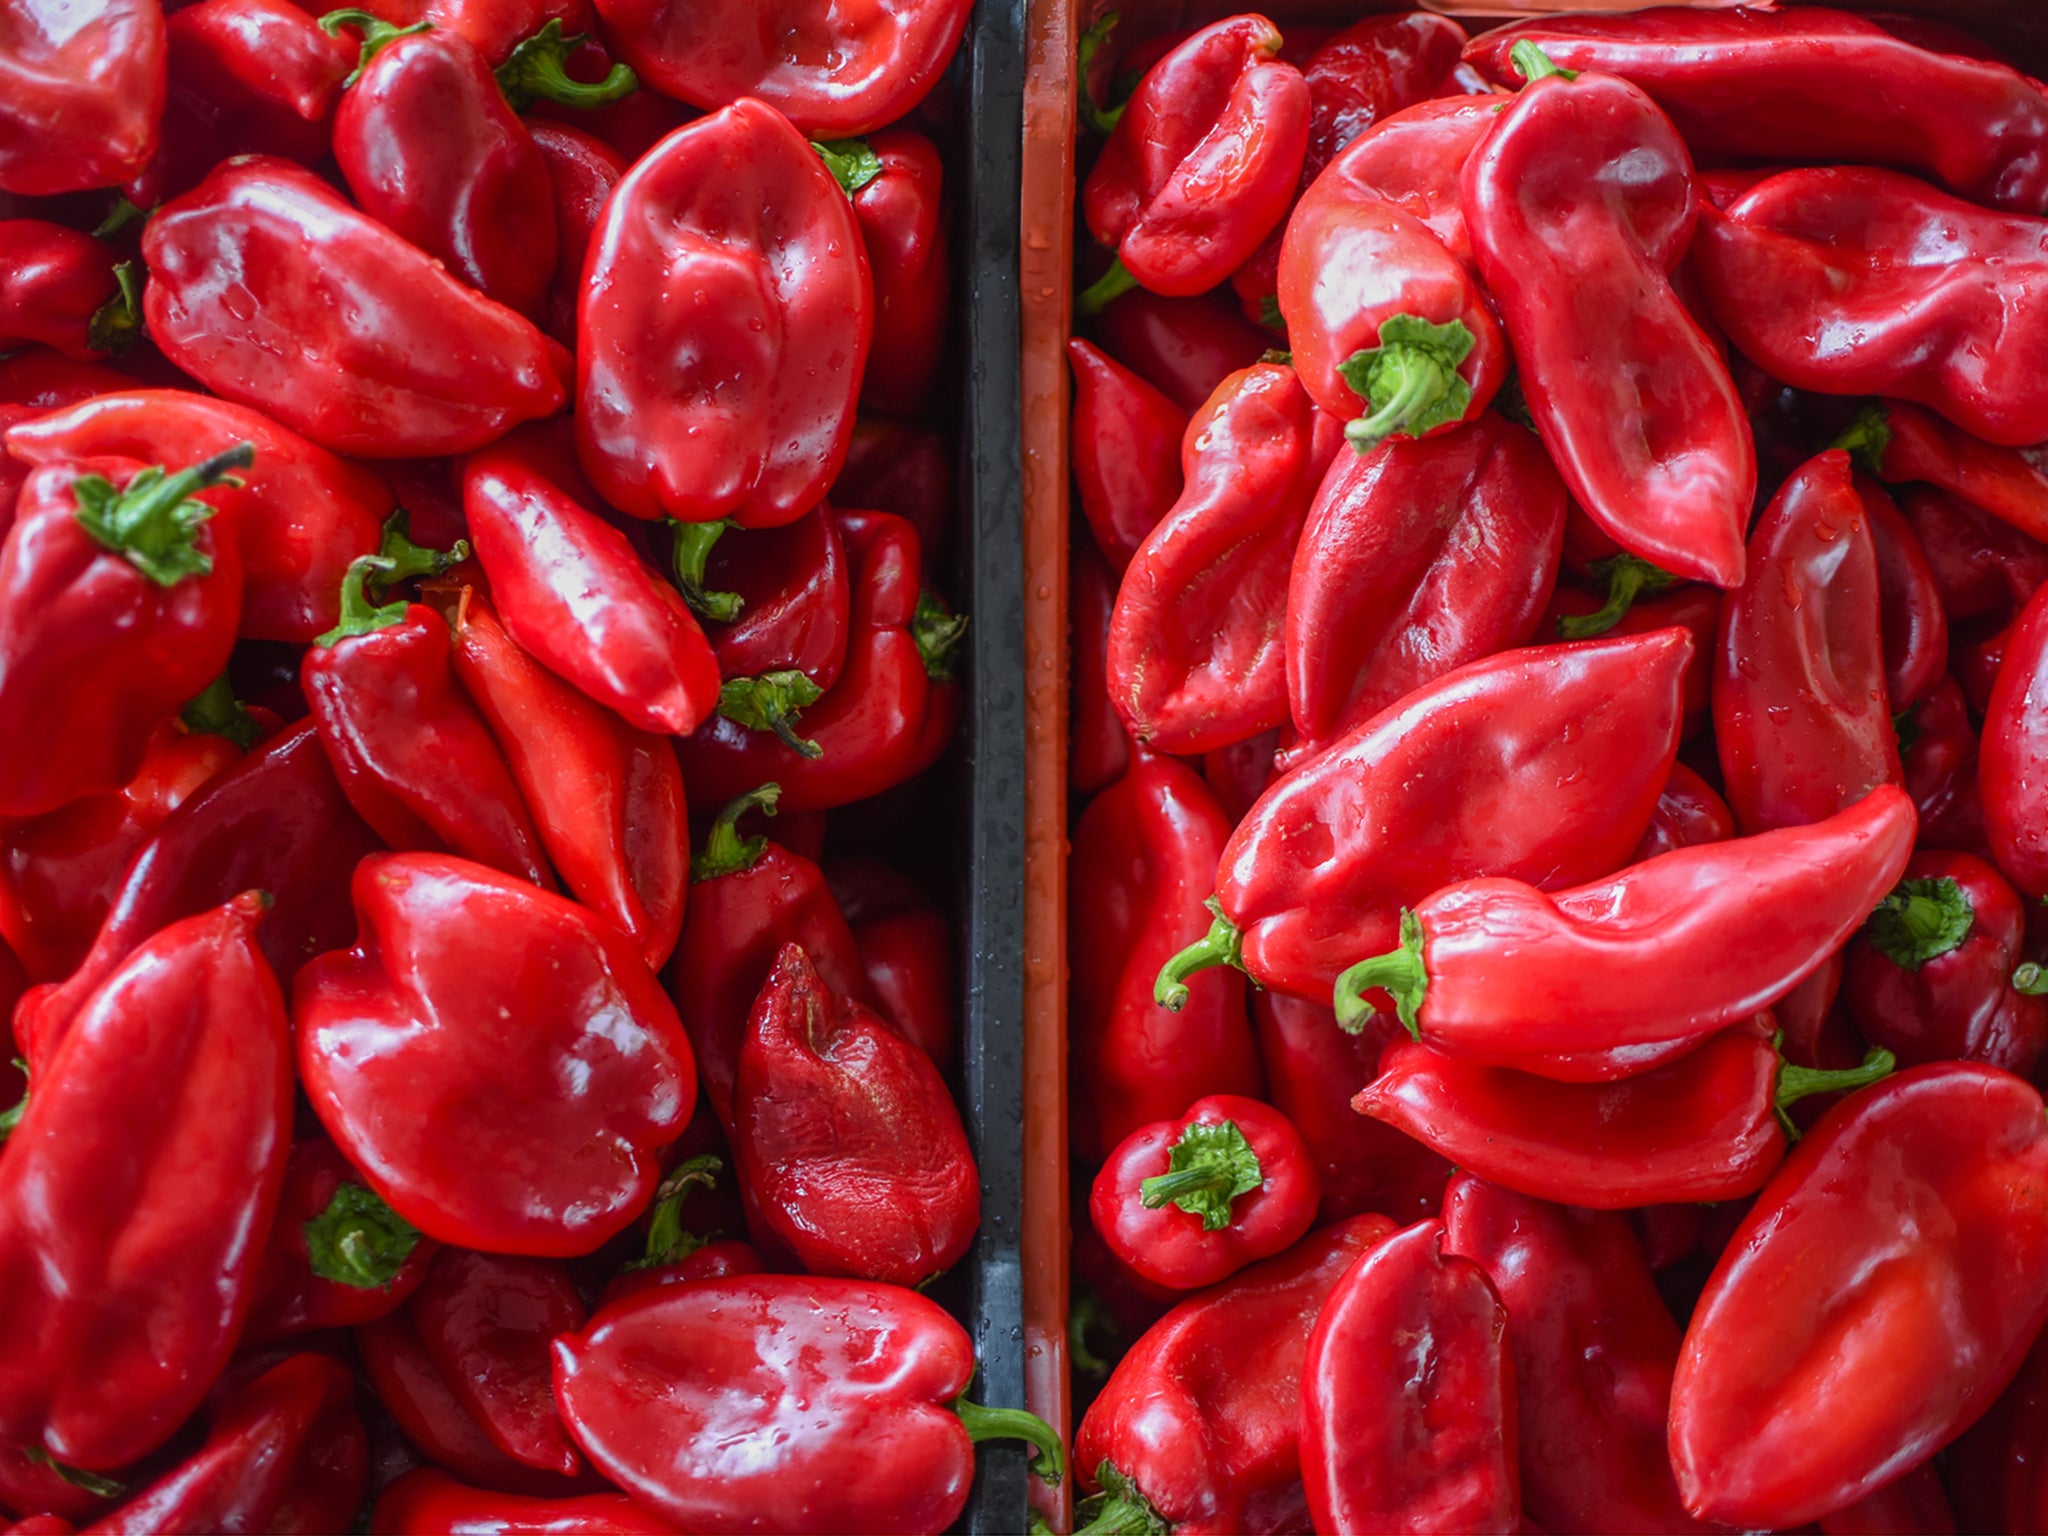 Freshly washed Balkan peppers ready to be charred in the aivar-making process